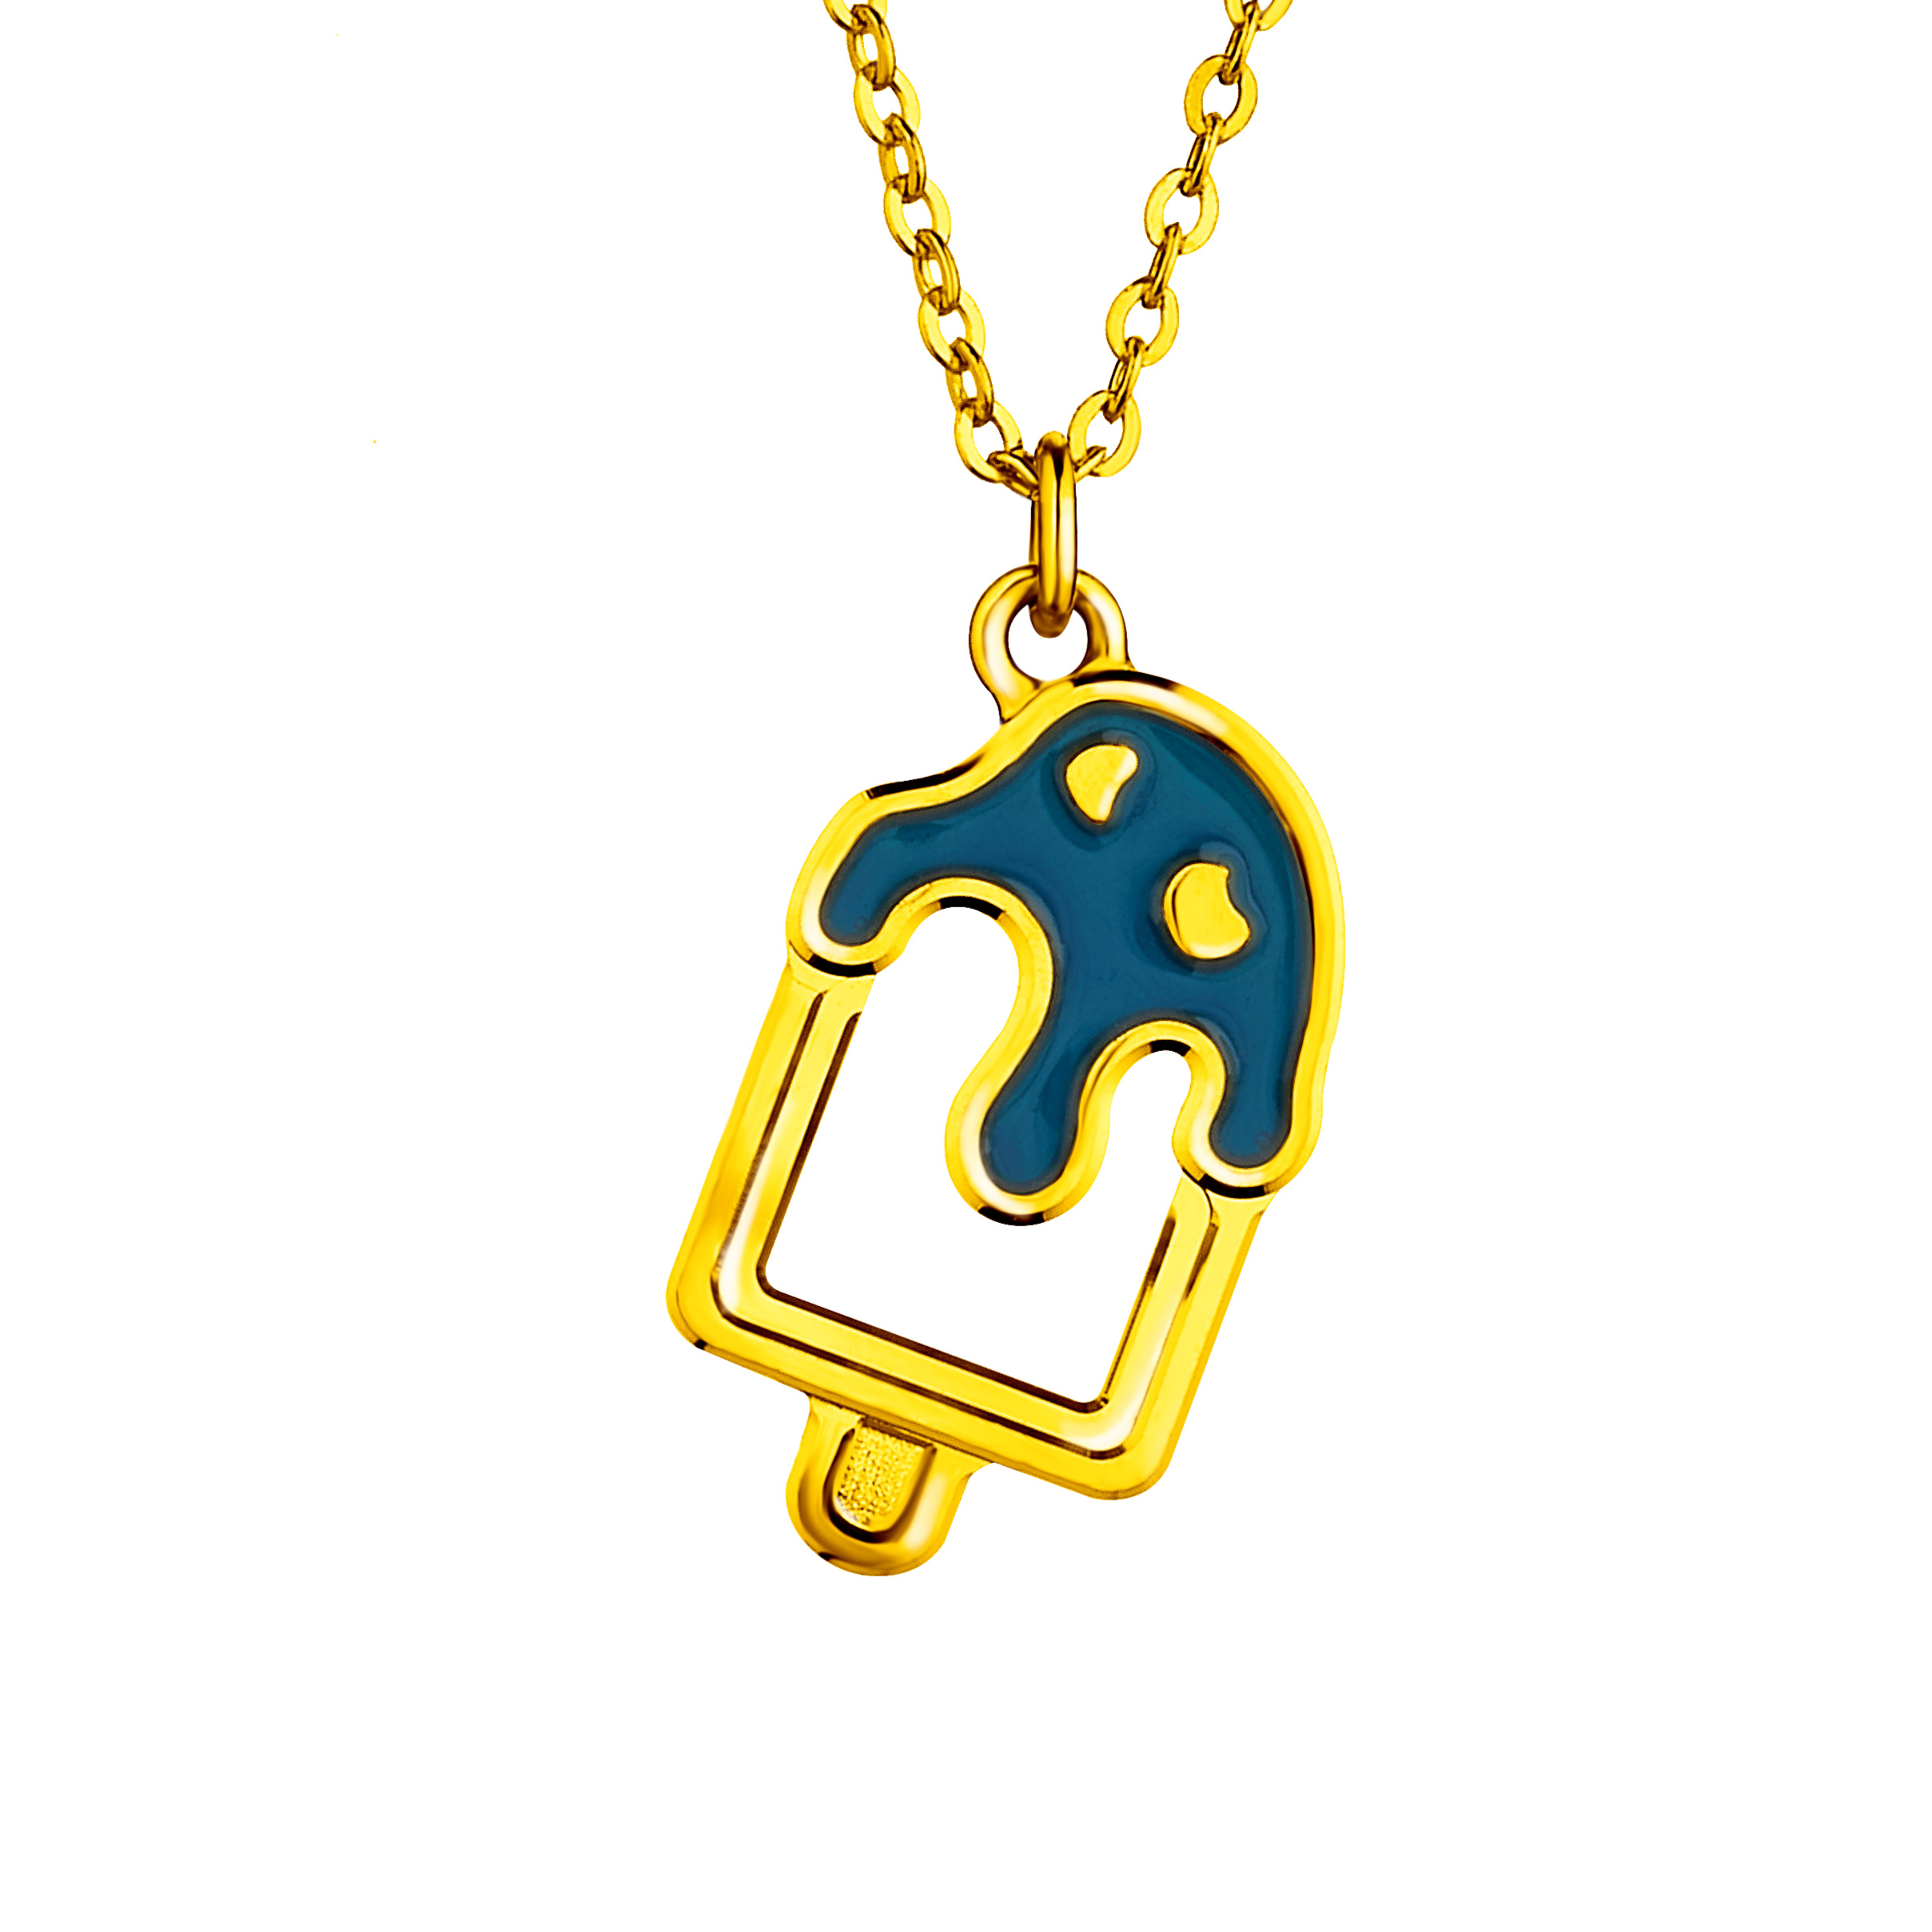 Dear Q "Ice-lolly" Gold Necklace